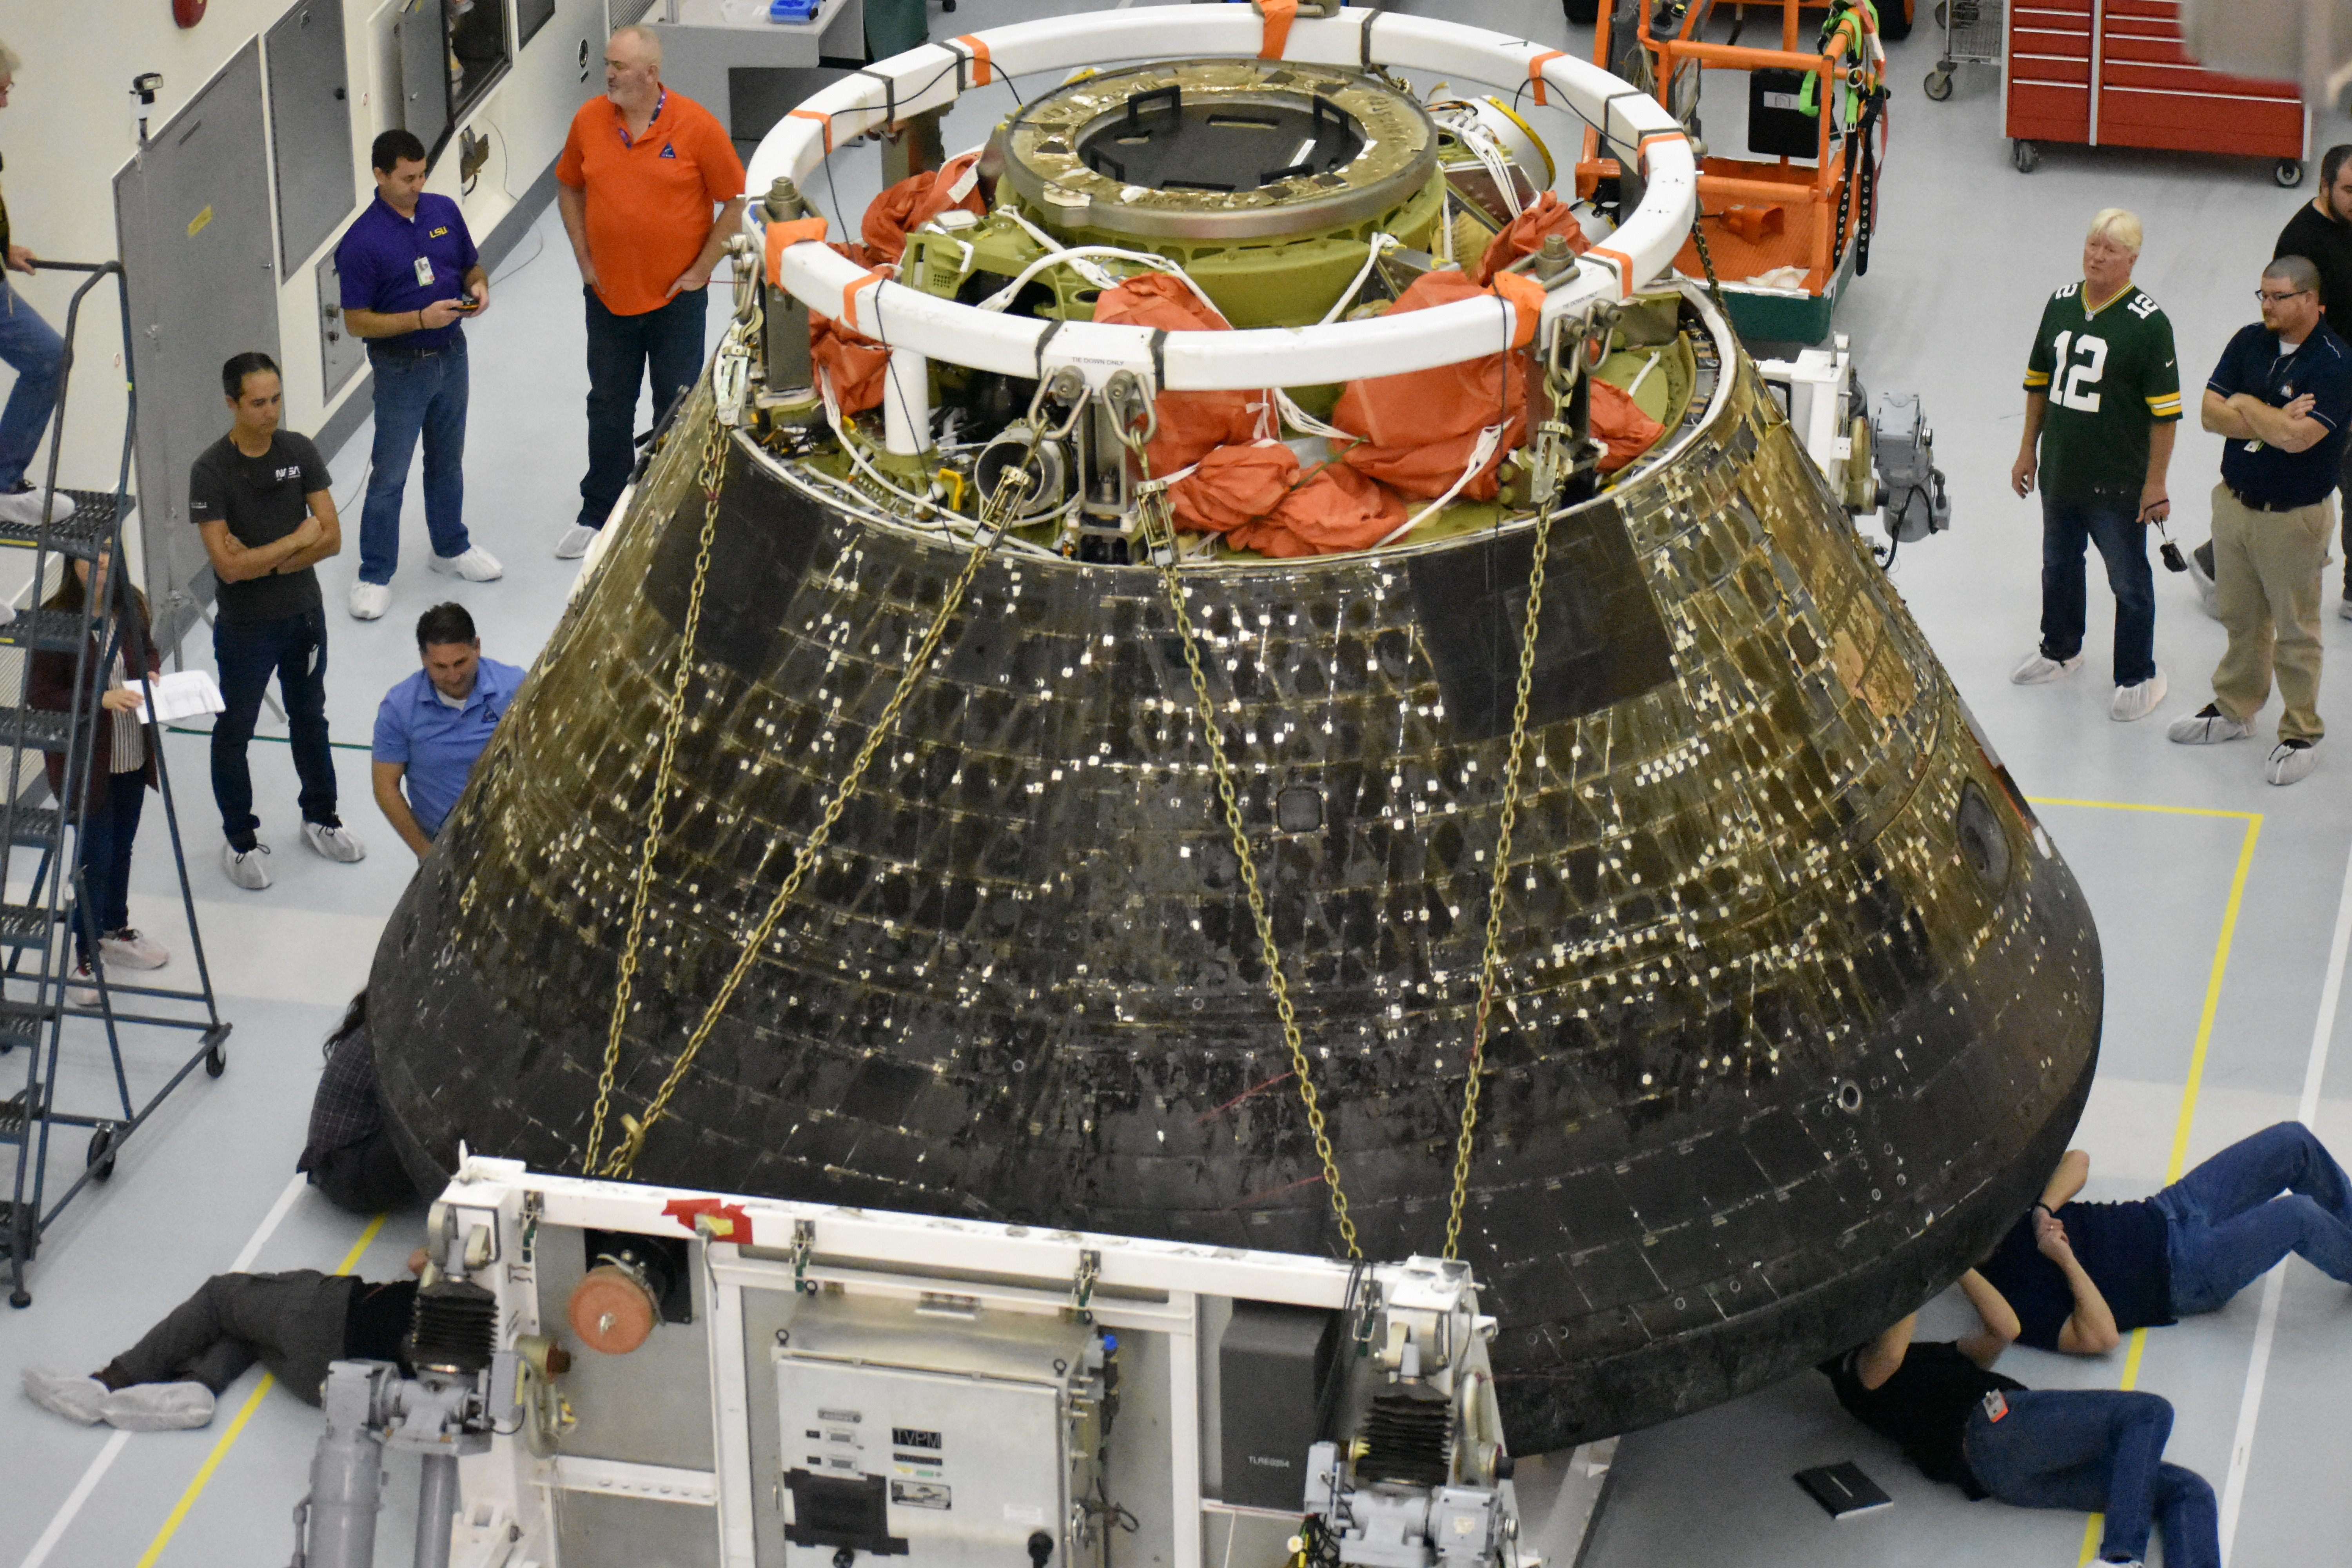 journey Specialists examine the Artemis 1 Orion spacecraft's heat guard at NASA's Kennedy Space Center in Florida. Image launched Jan. 6, 2023.